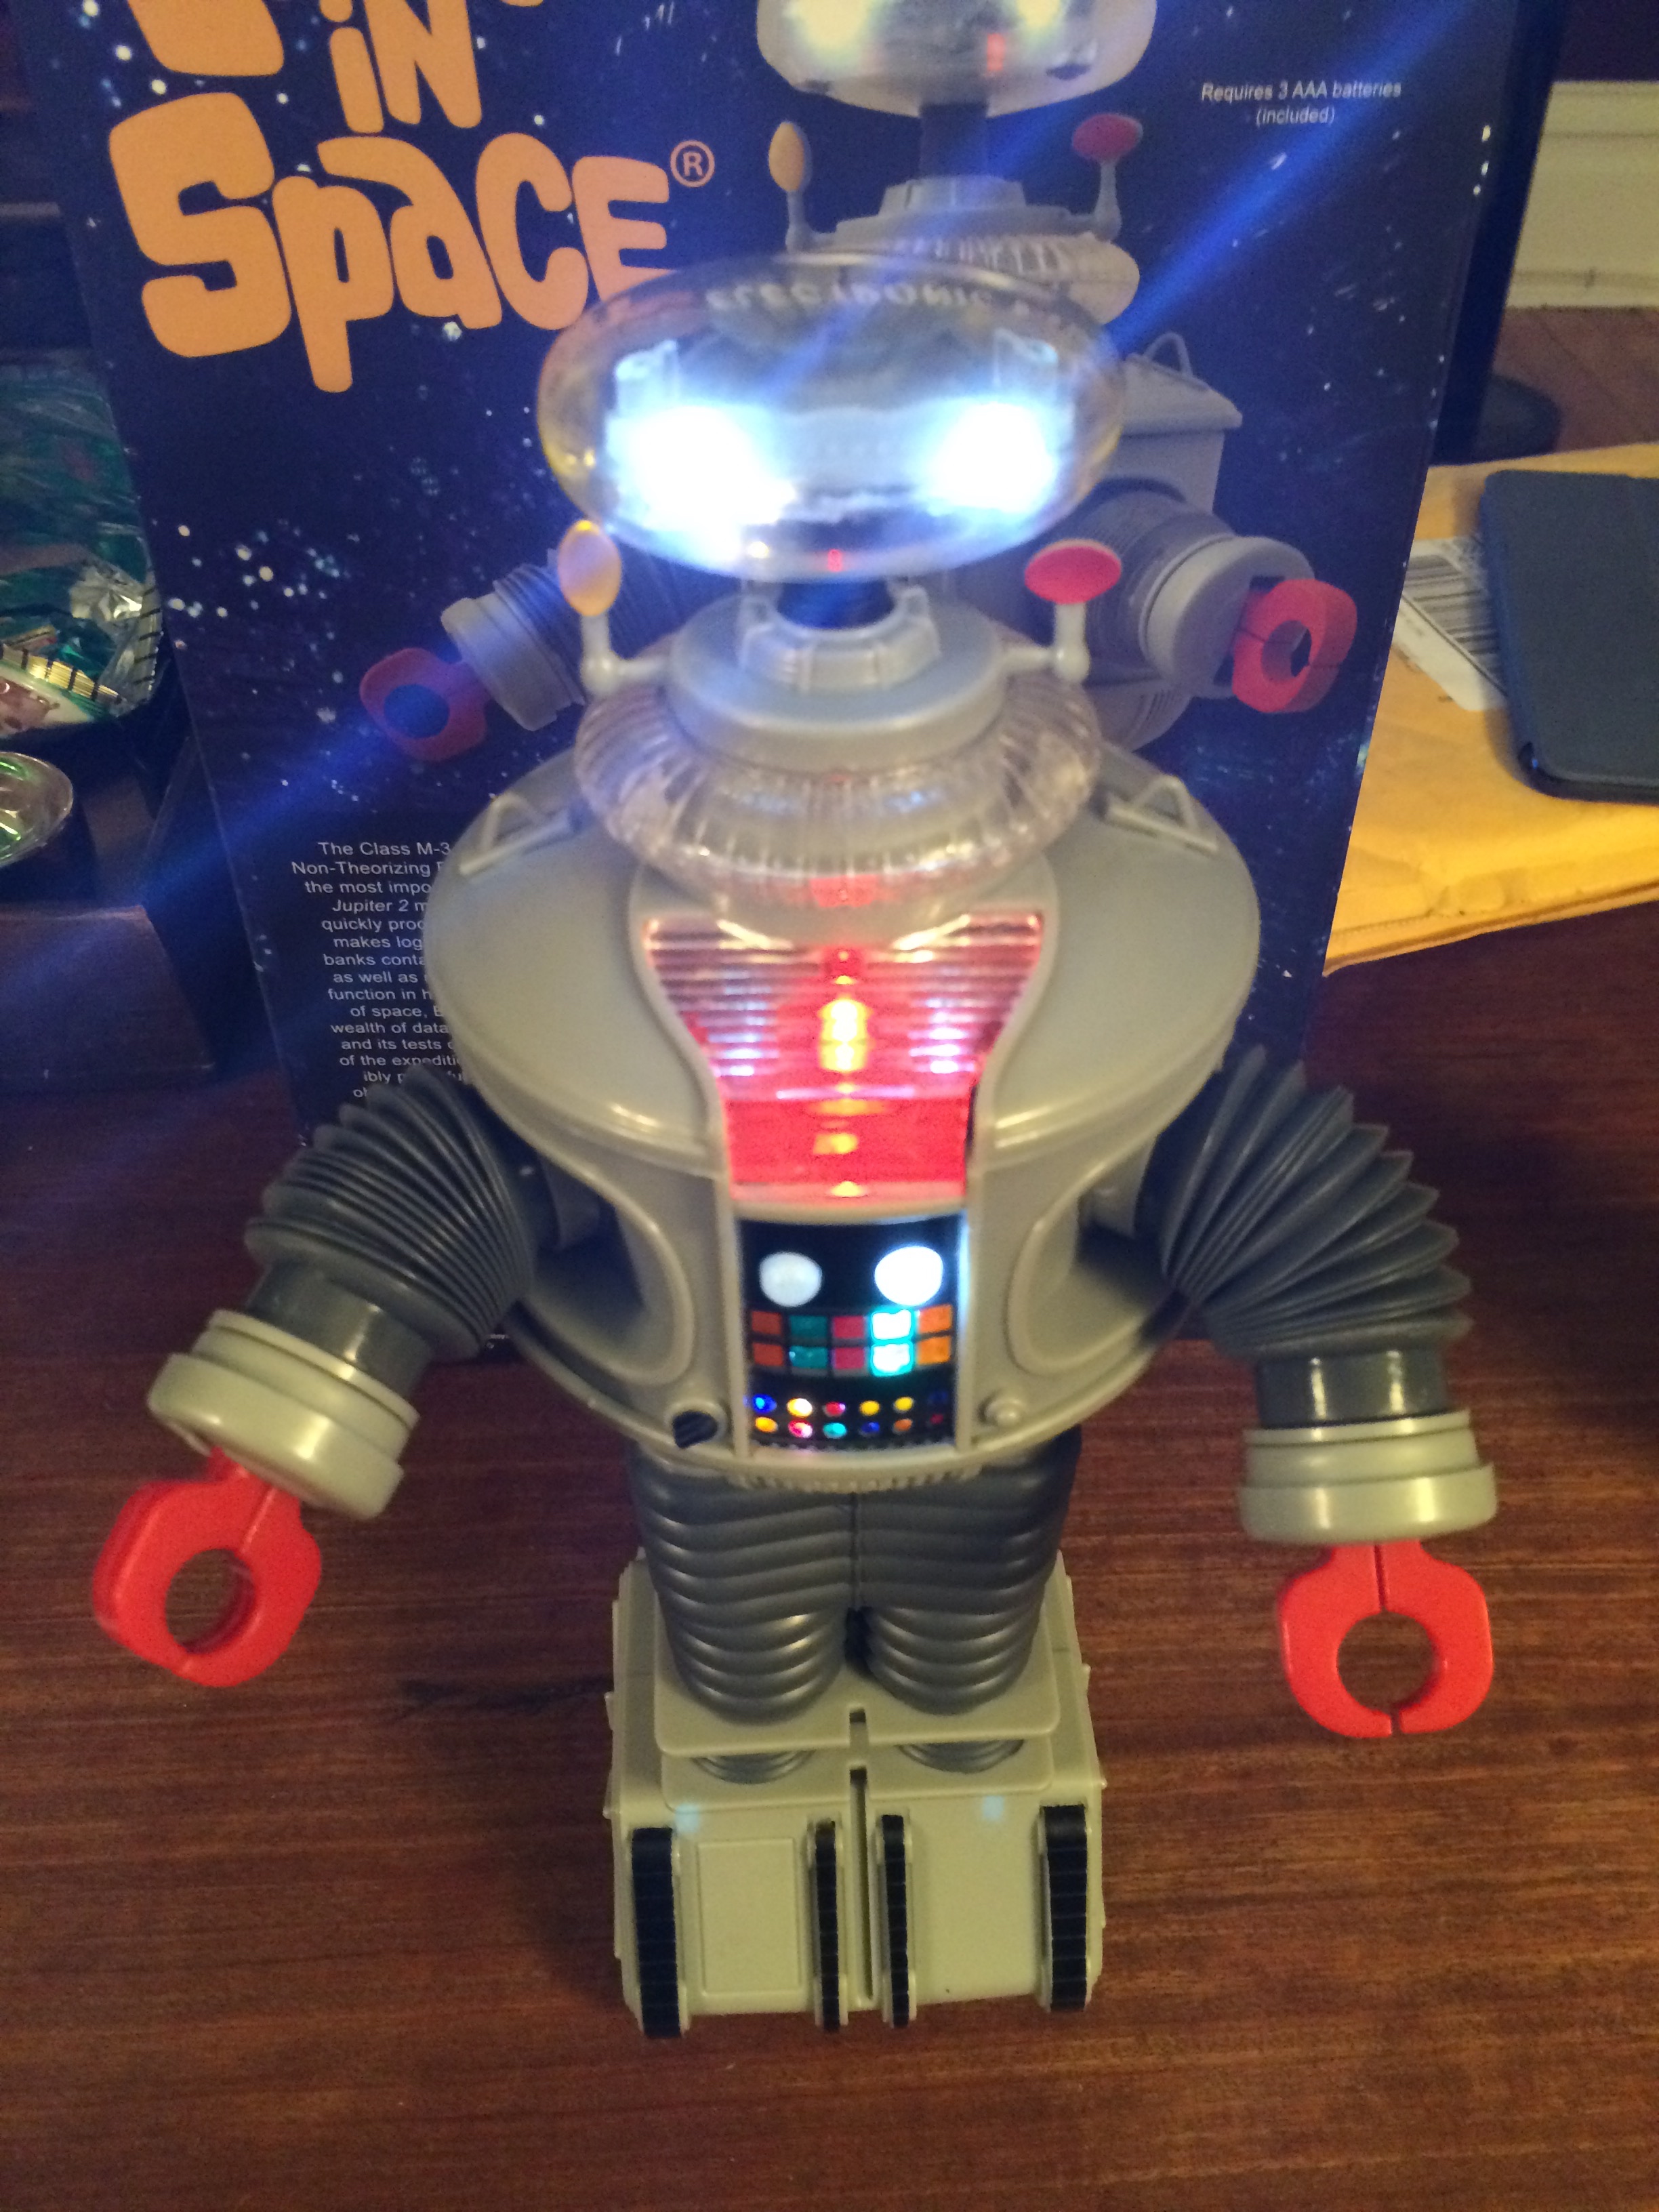 Lost In Space B9 Electronic Talking Robot Diamond Select Toys 